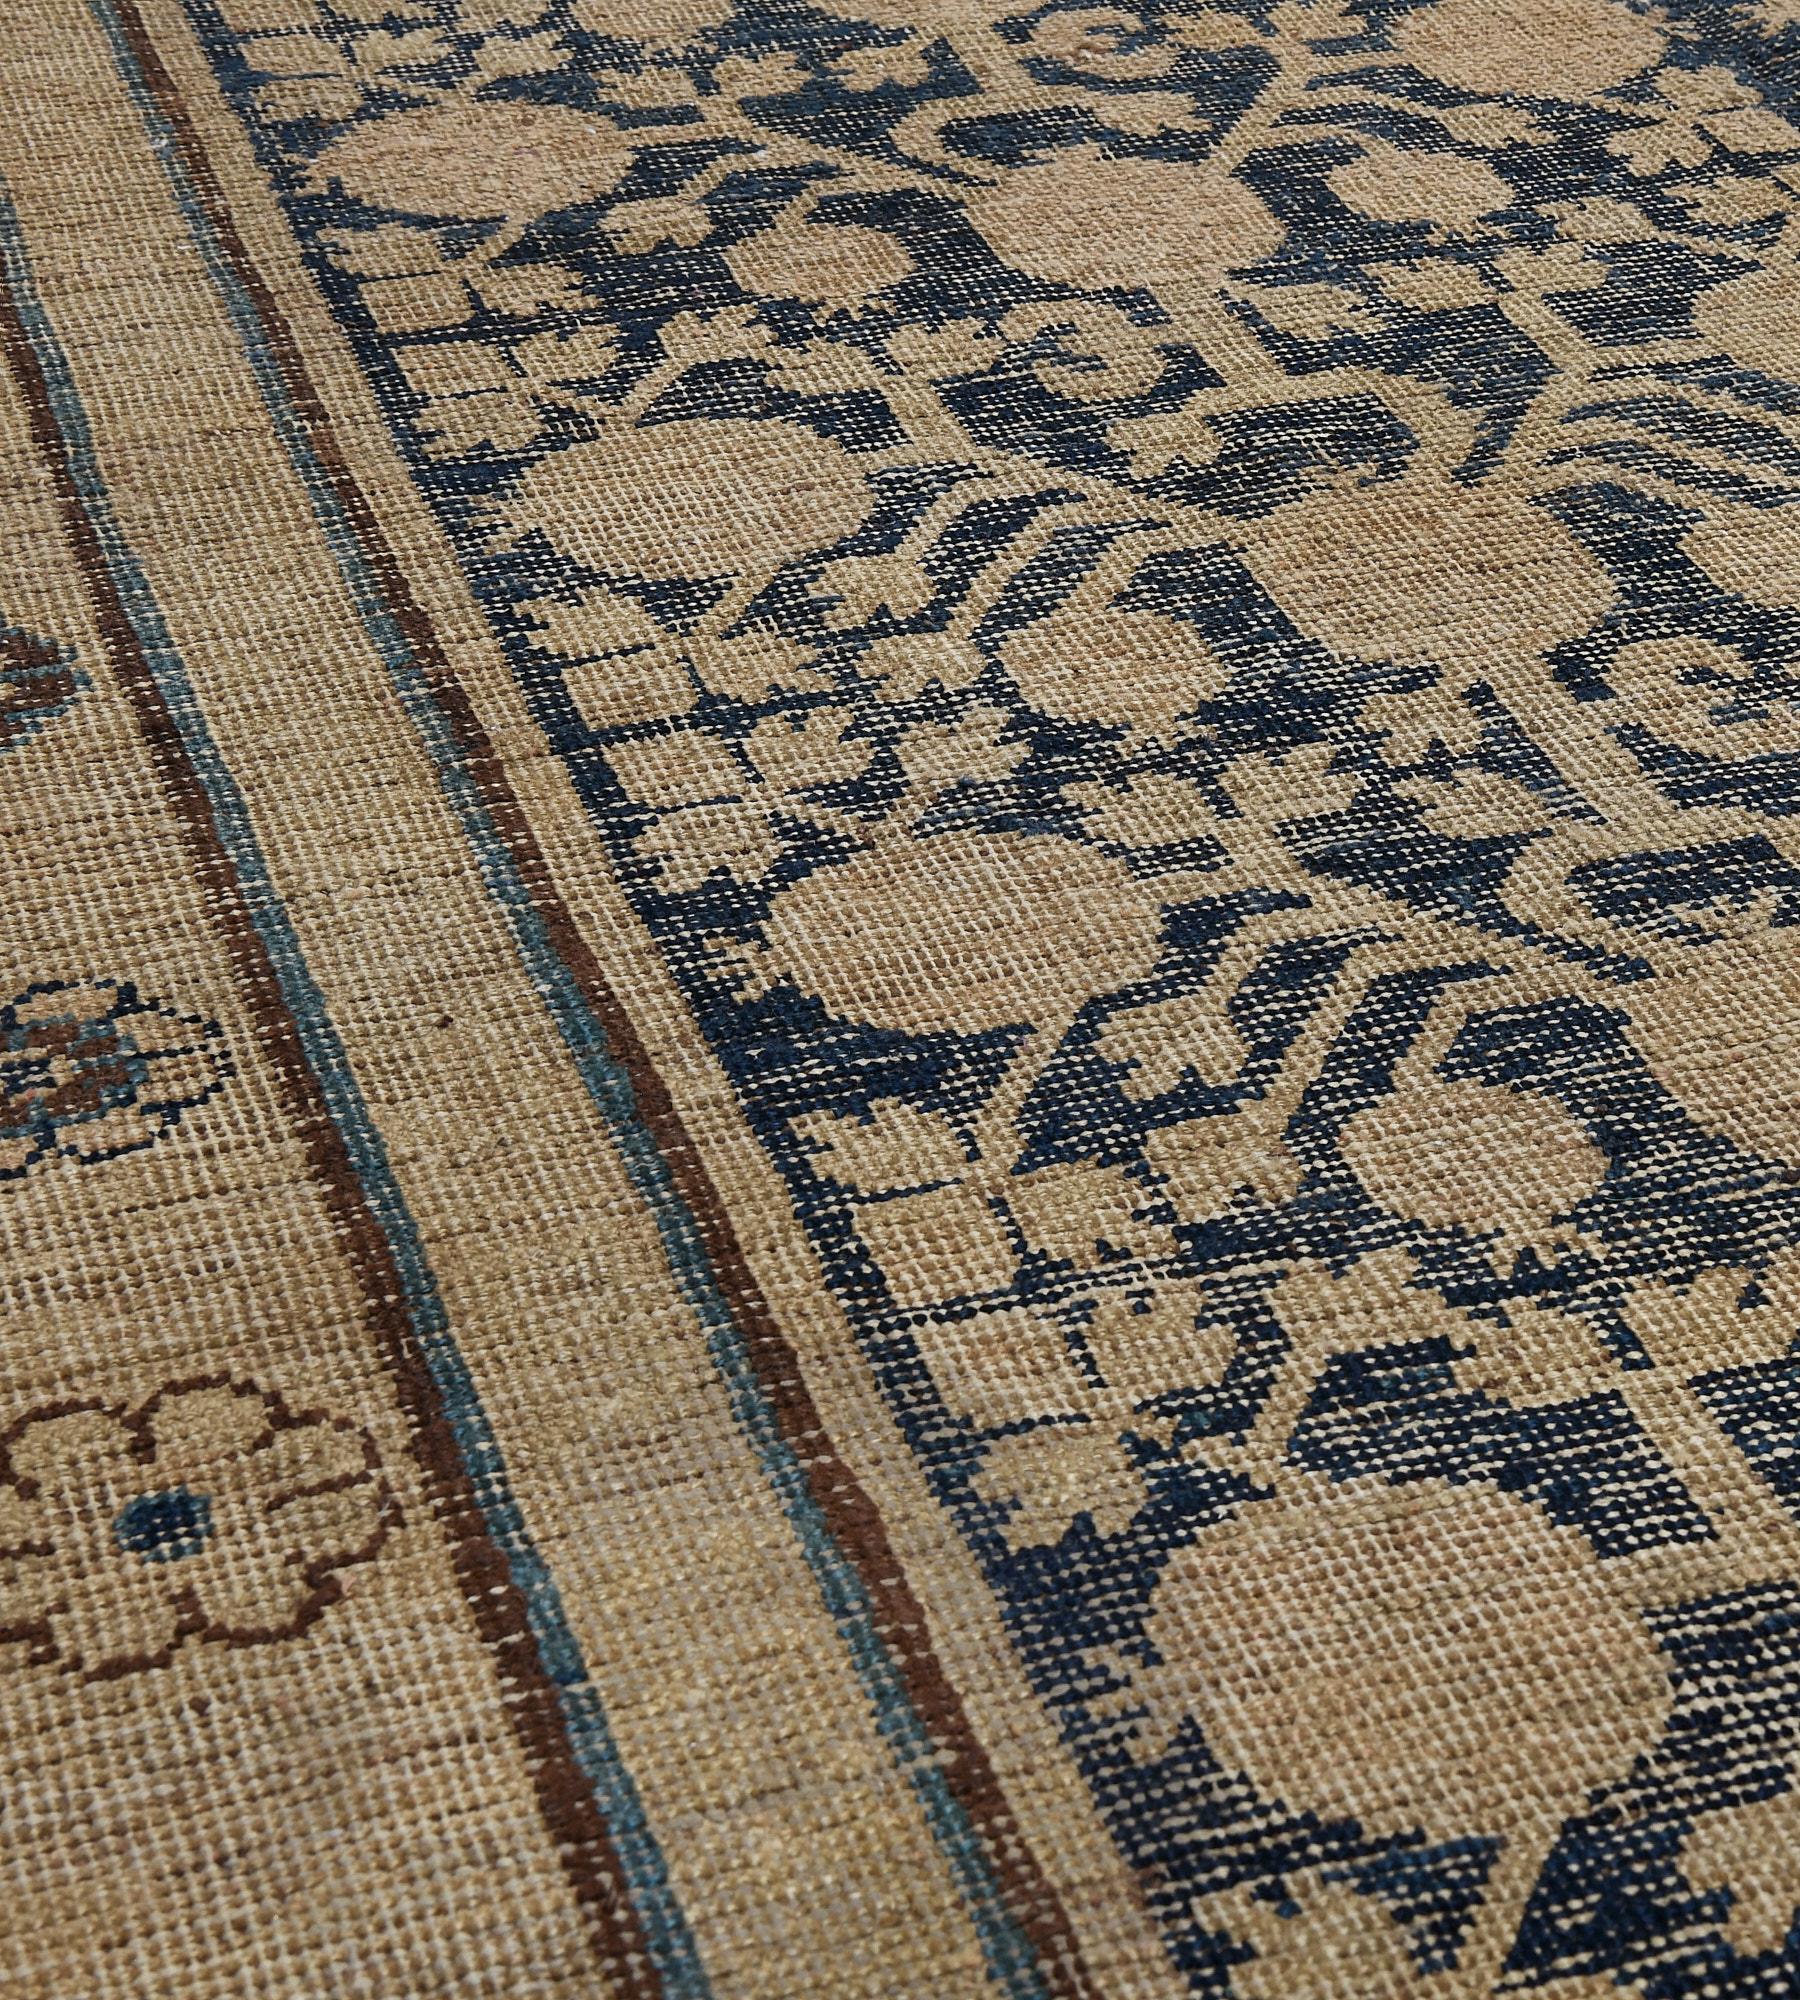 This antique Khotan rug has a deep indigo-blue field with an overall sandy-brown pomegranate and floral vine, in an outer broad sandy-brown border with cloud-motifs alternating with a plant motif, inner key-pattern, flowerhead and plain stripes.